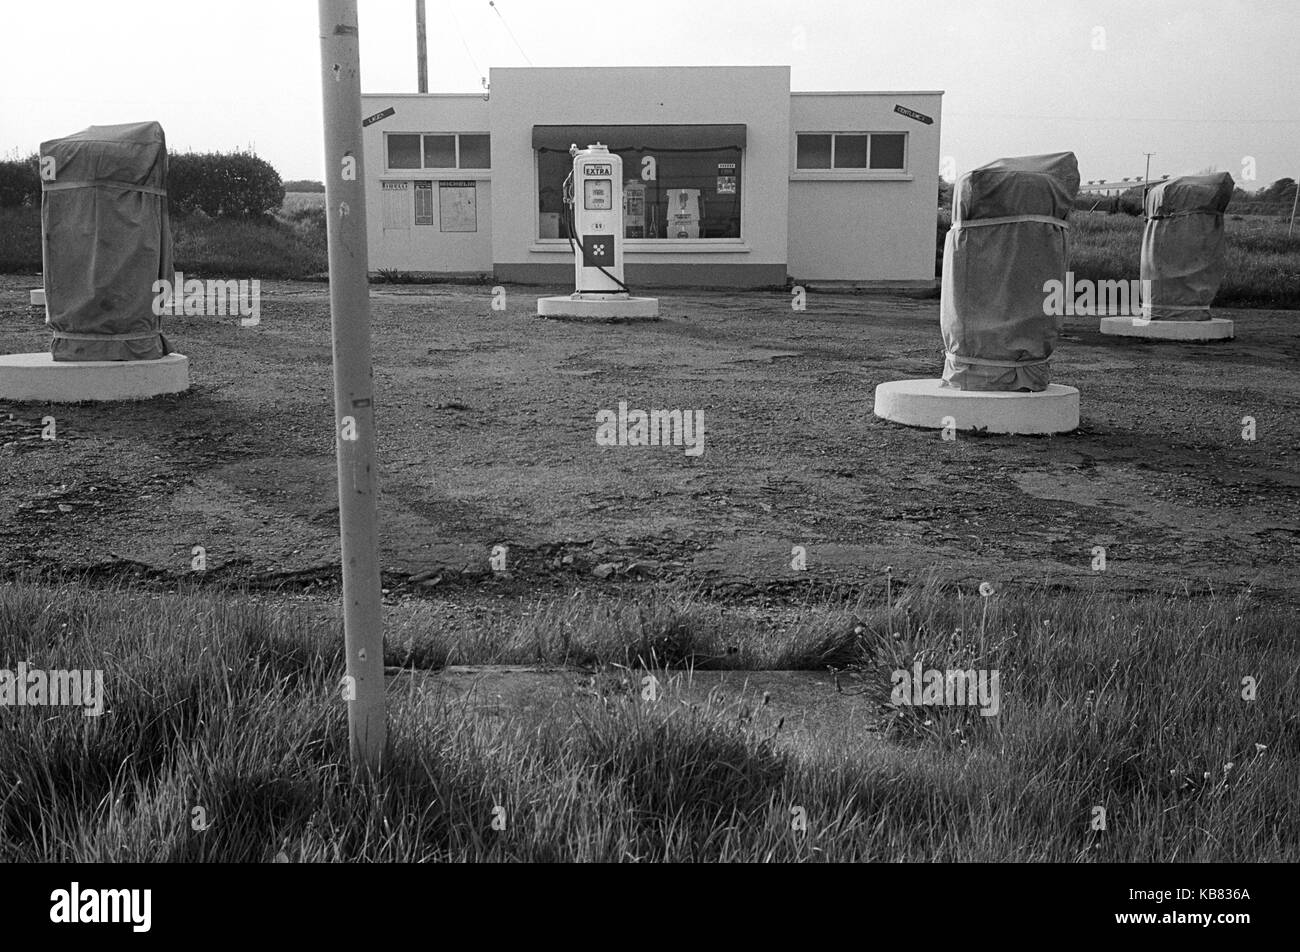 Petrol station closed down boarded up, Devon 1970s UK. HOMER SYKES Stock Photo